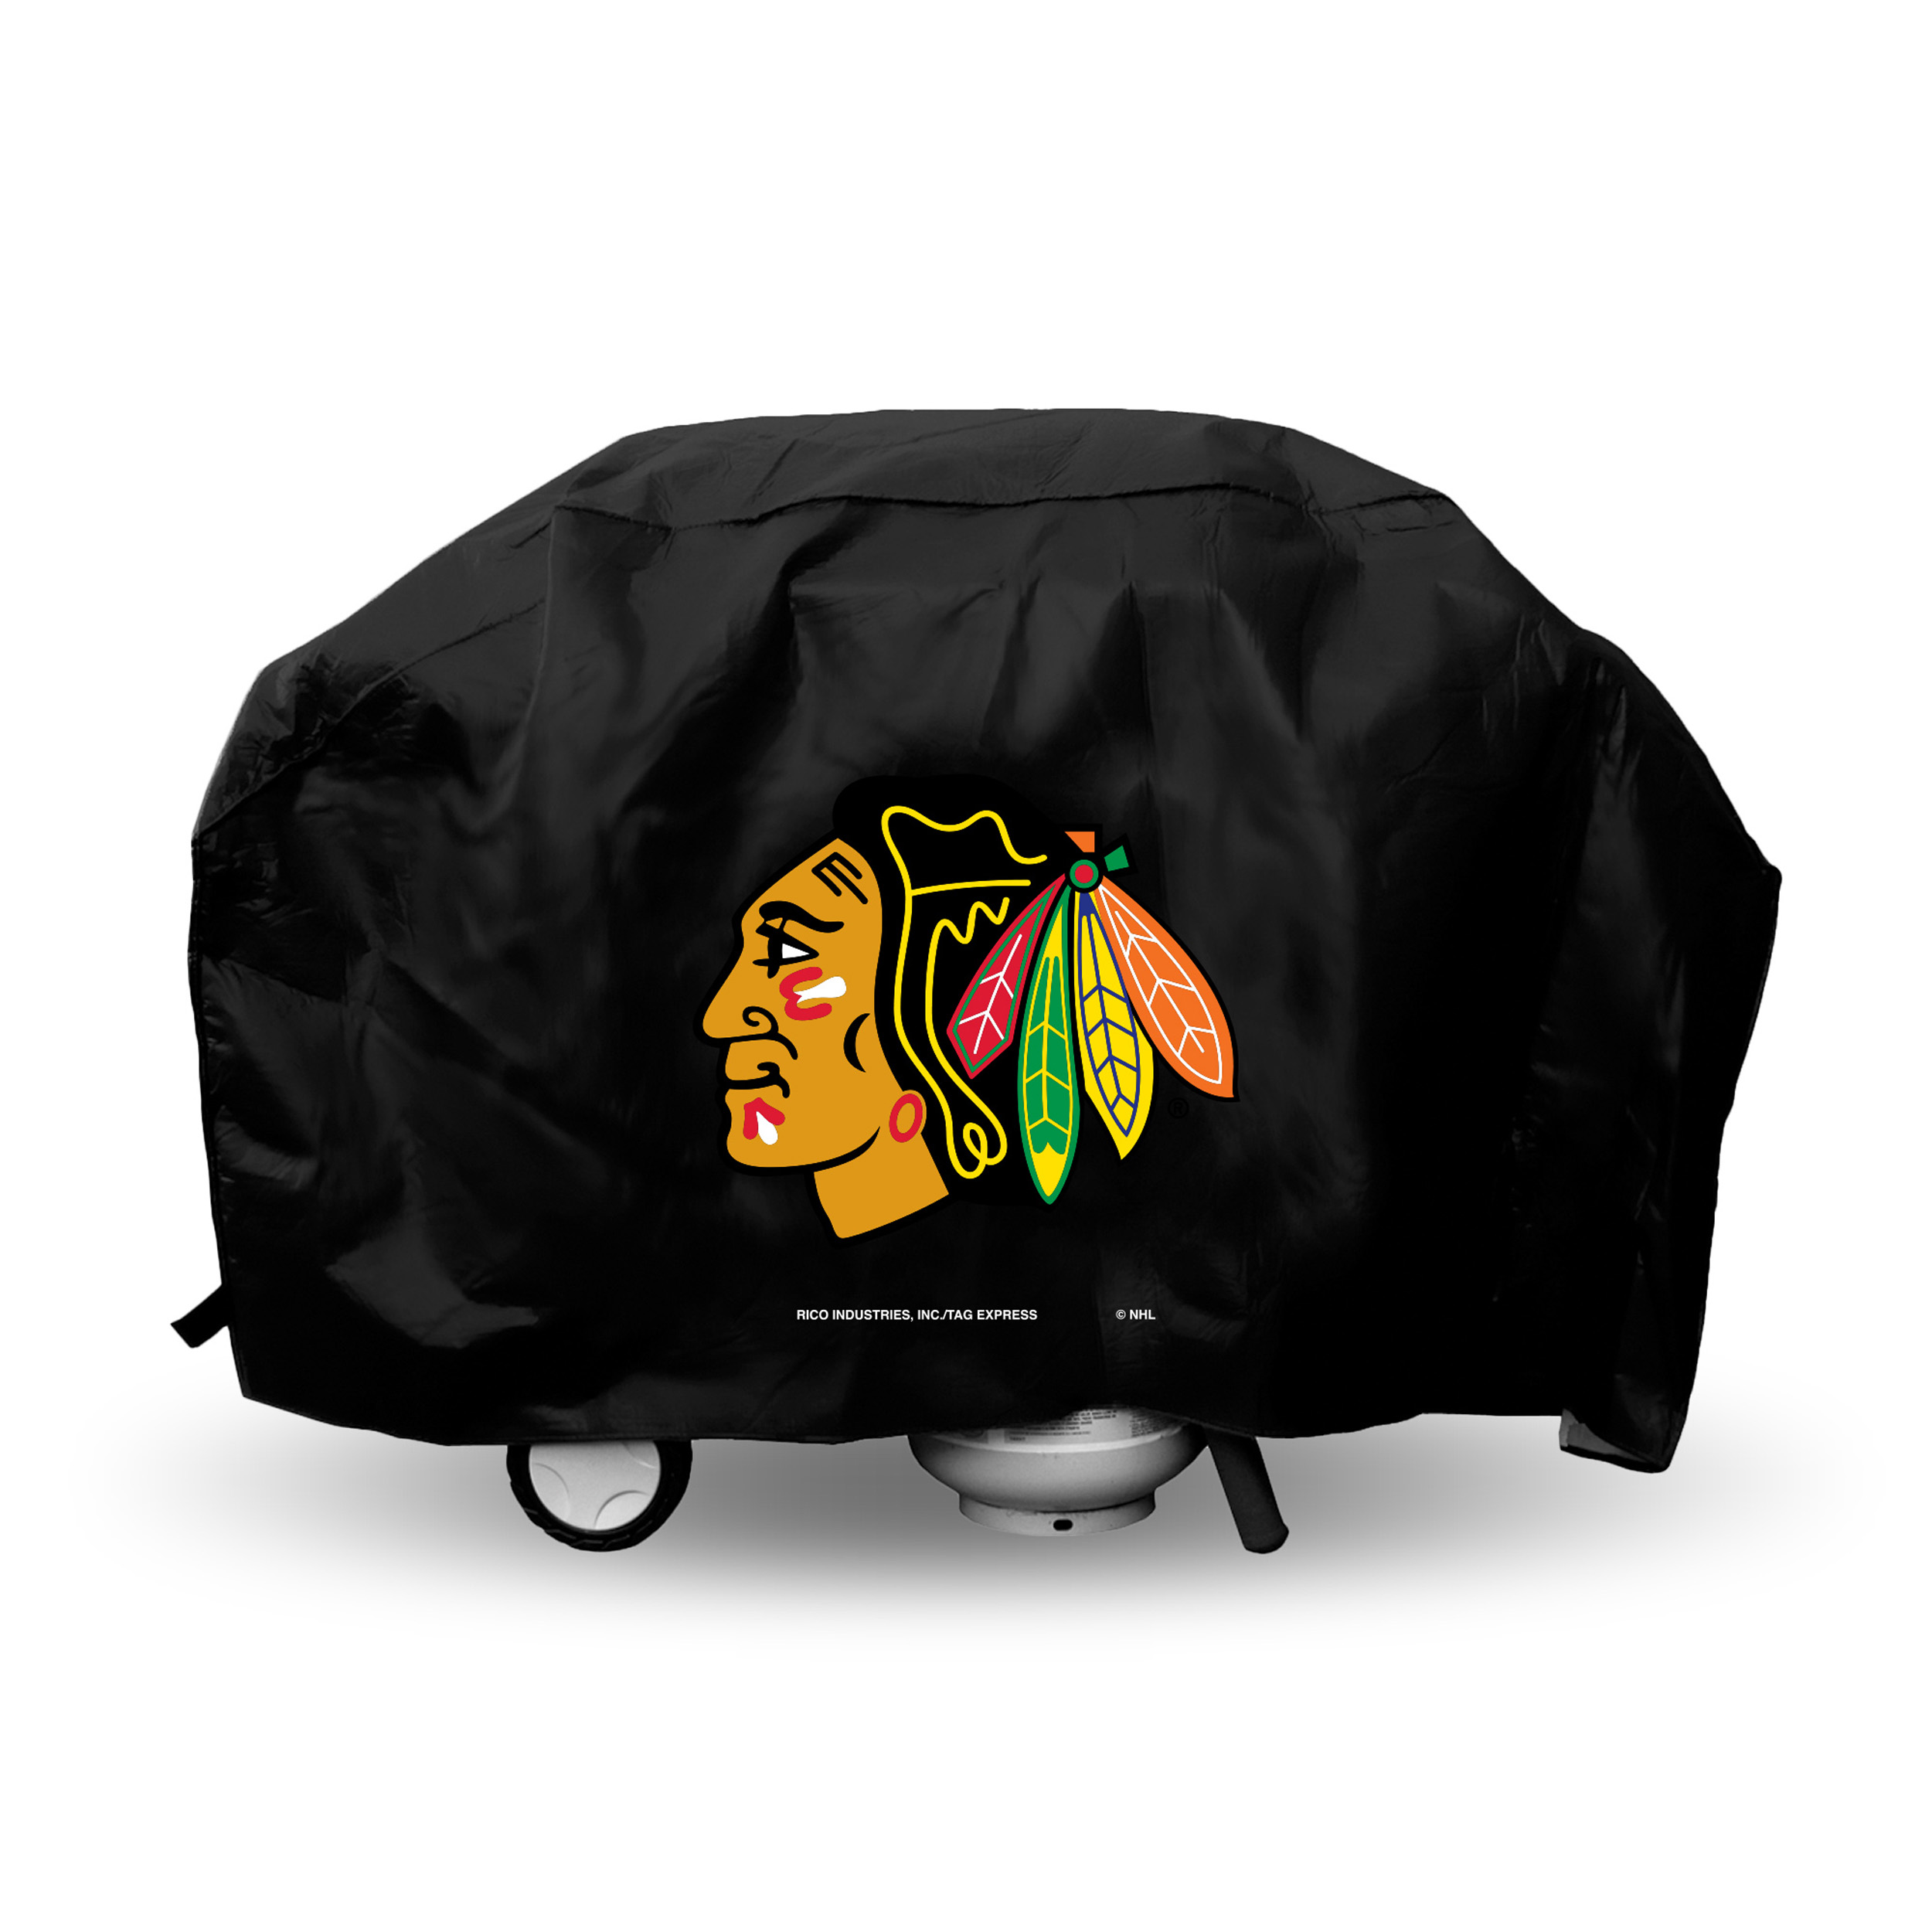 Rico Industries NHL - Economy Grill Cover, Chicago Blackhawks - image 1 of 3